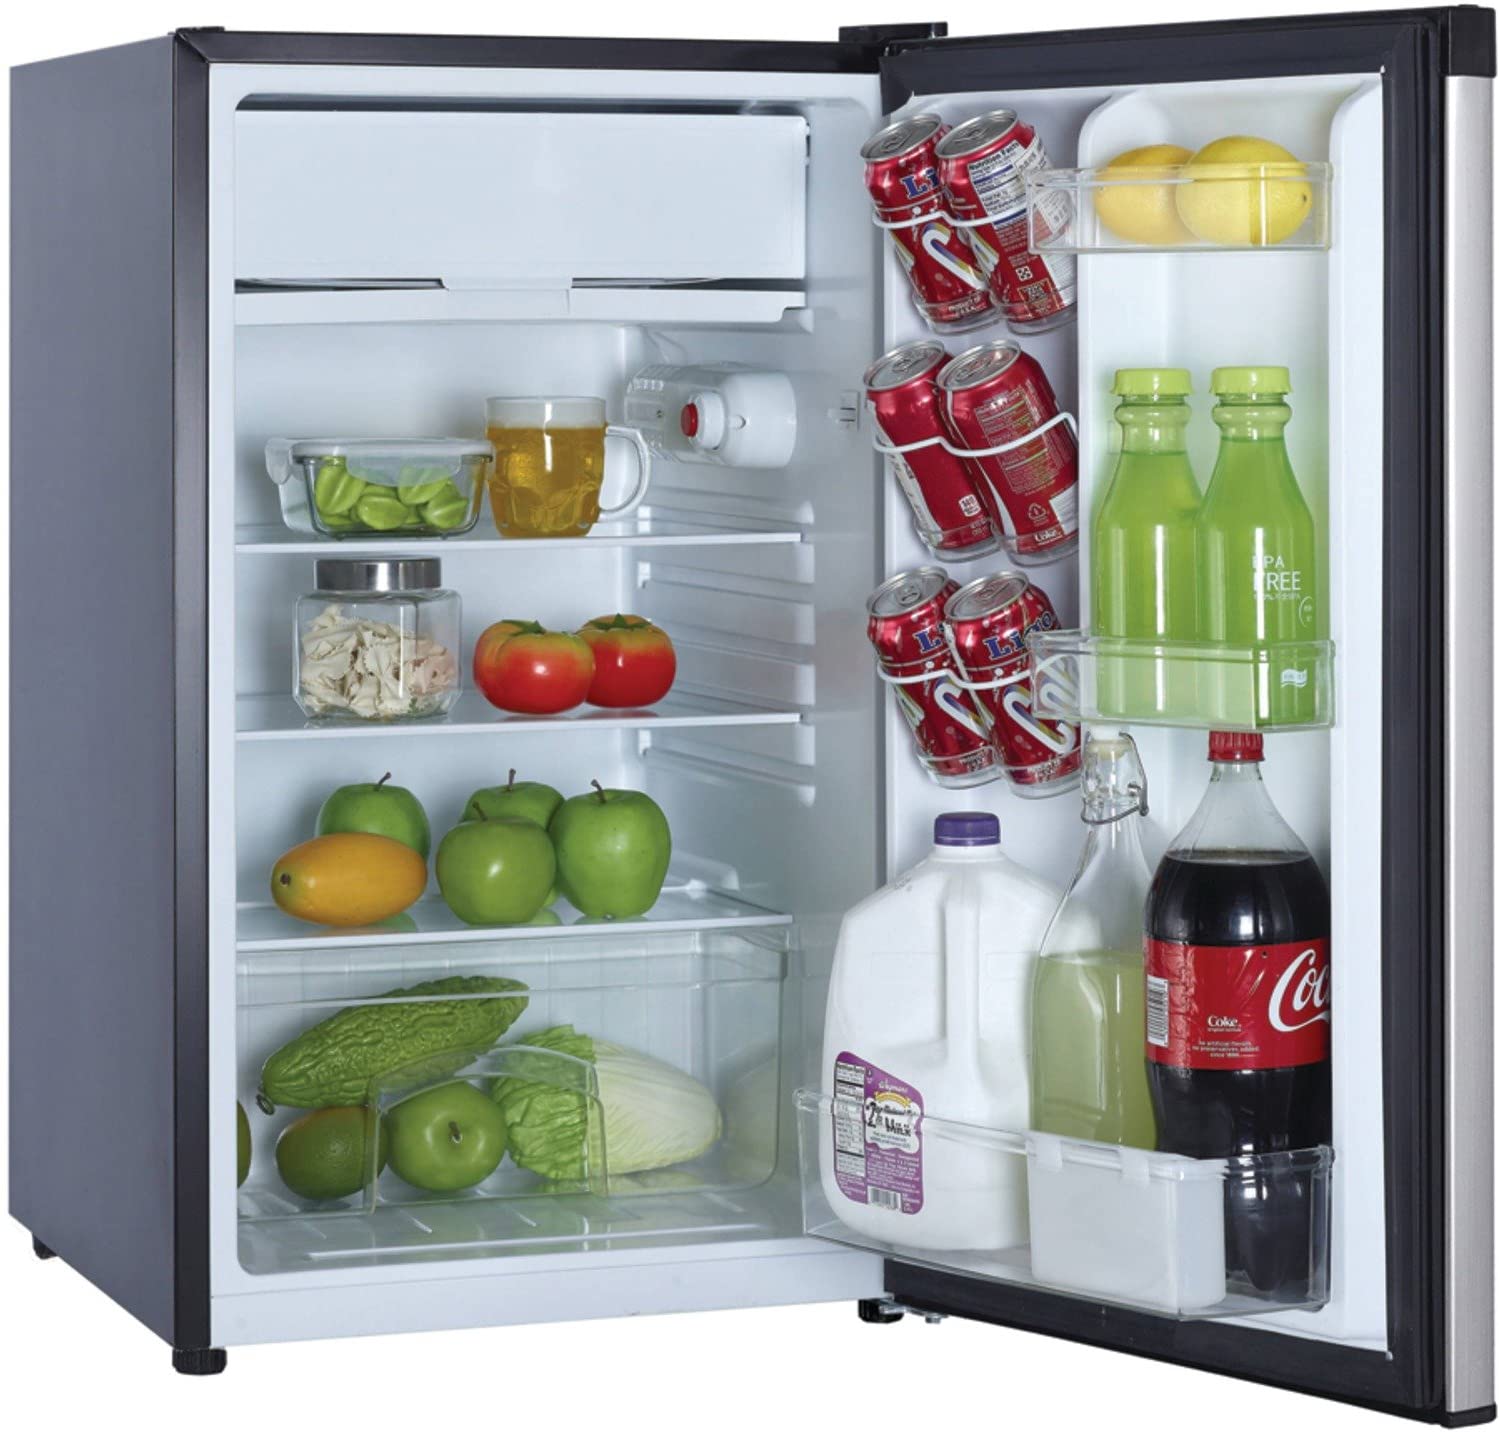 Review of Magic Chef MCBR440S2 Refrigerator, 4.4 cu. ft, Stainless Steel